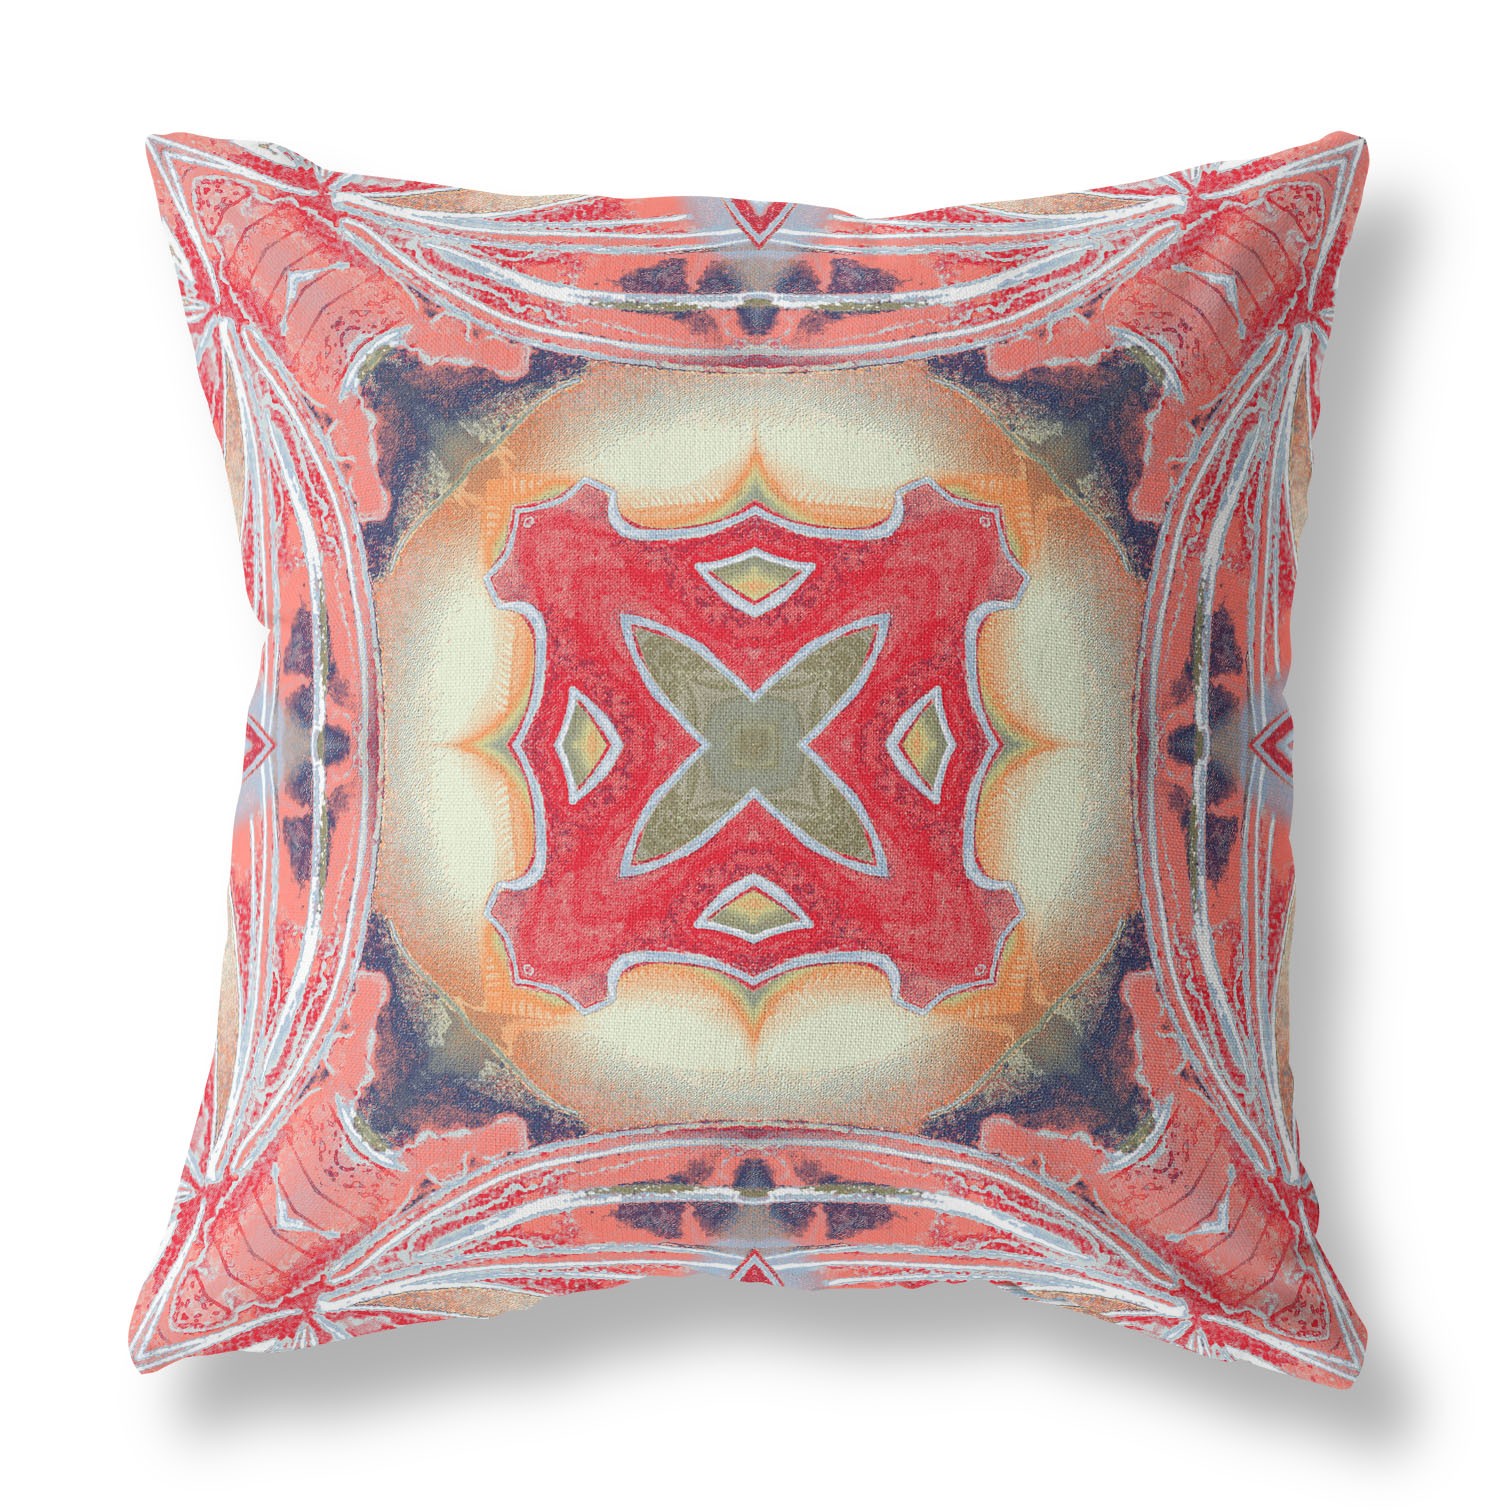 18"x18" Pink Peach Red Zippered Broadcloth Geometric Throw Pillow-417633-1